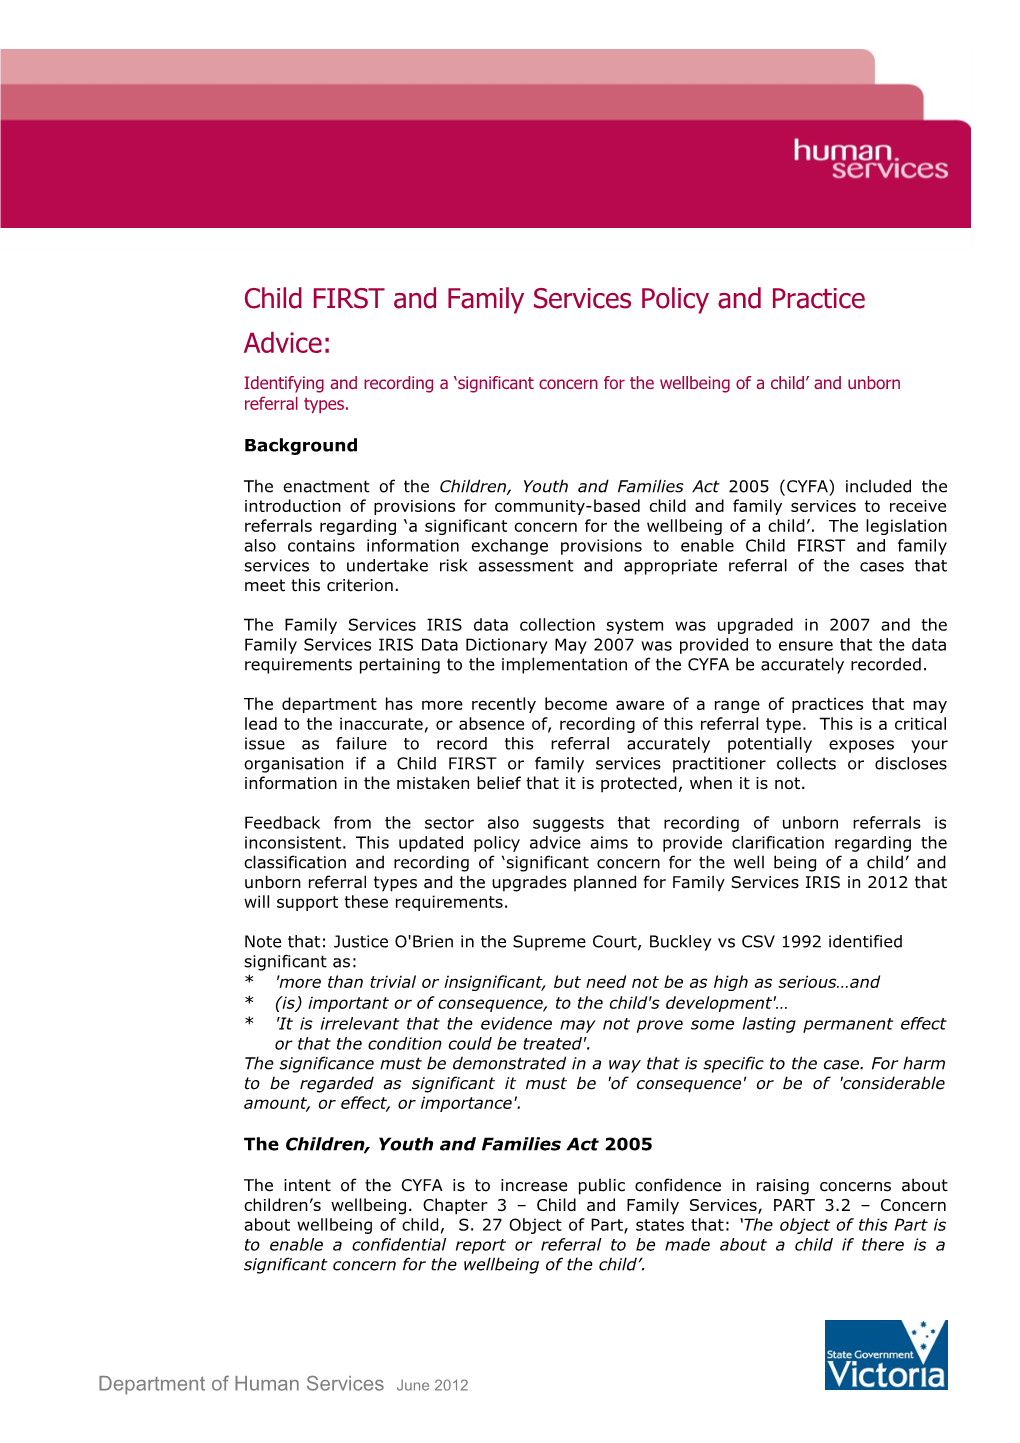 Child FIRST and Family Services Policy and Practice Advice